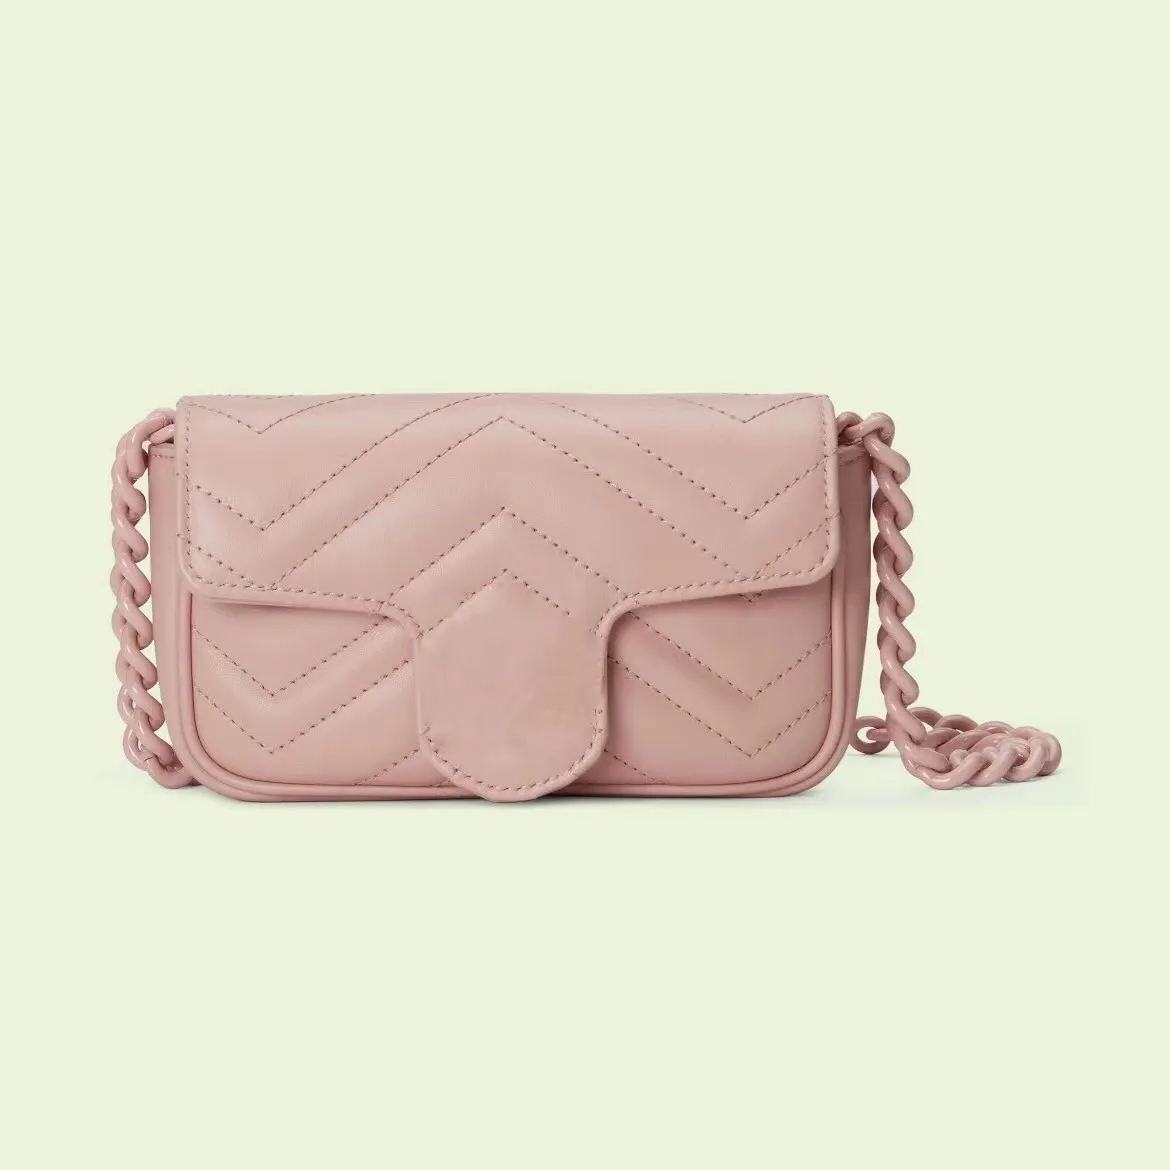 699757 Marmont Waist Bags Macaron V Quilted Leather Chain Wallets Super Mini Bag key Ring Inside Attachable to Totes Women Fashion Crossboday Flaps 476433